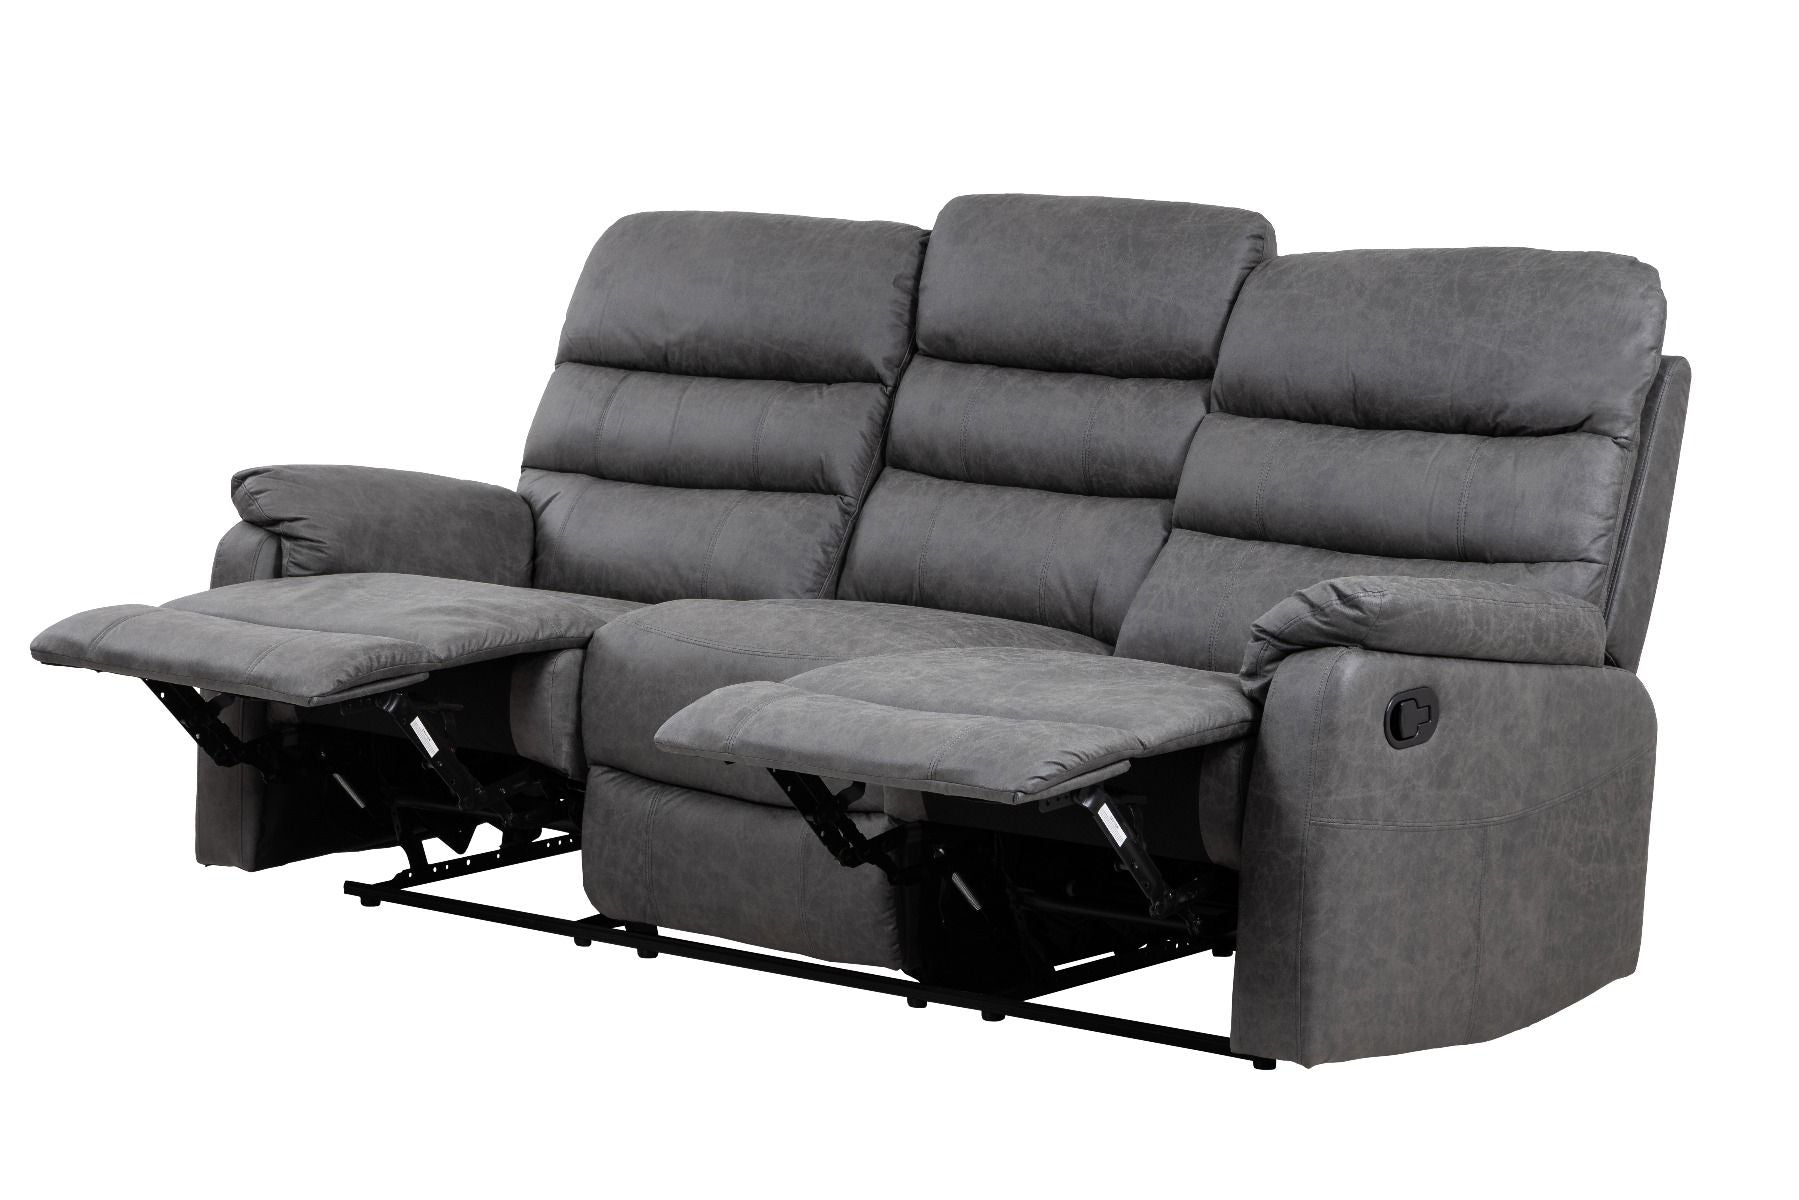 Taylor 3 Seater Recliner-Leather Air-Antique Grey Rub Off